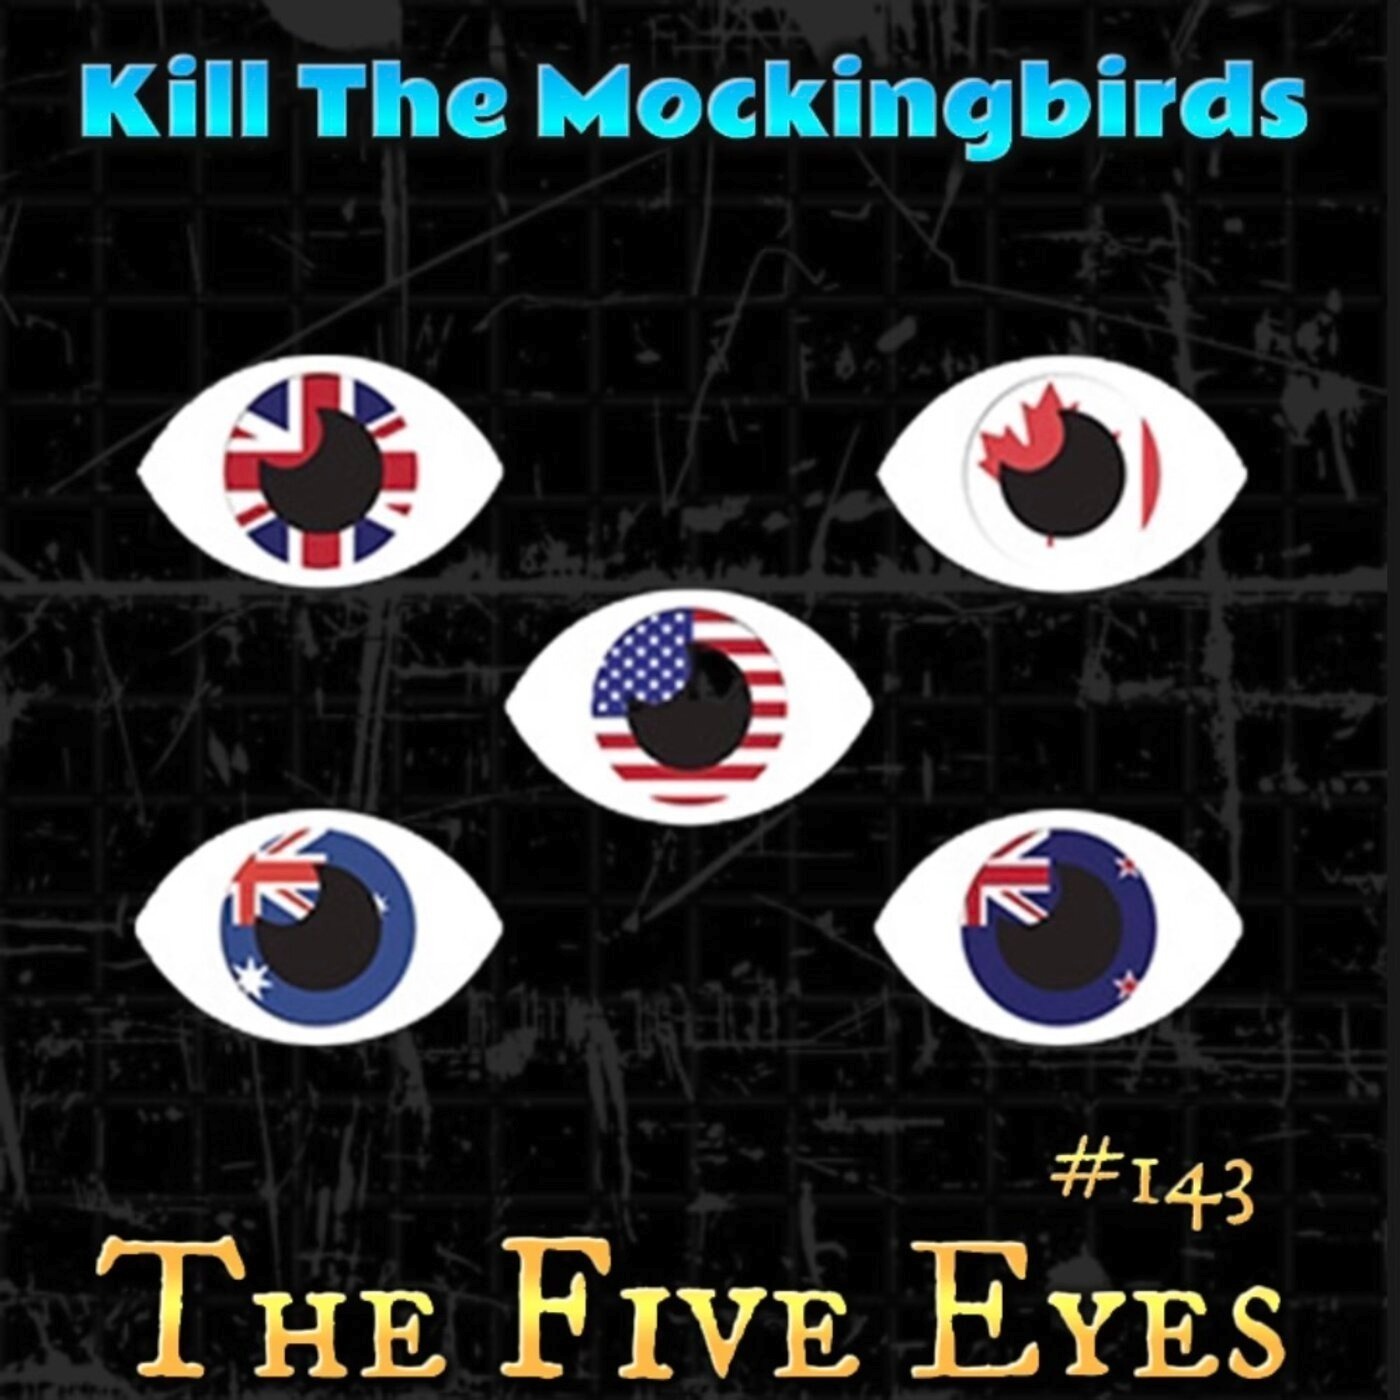 #143 “THE FIVE EYES”